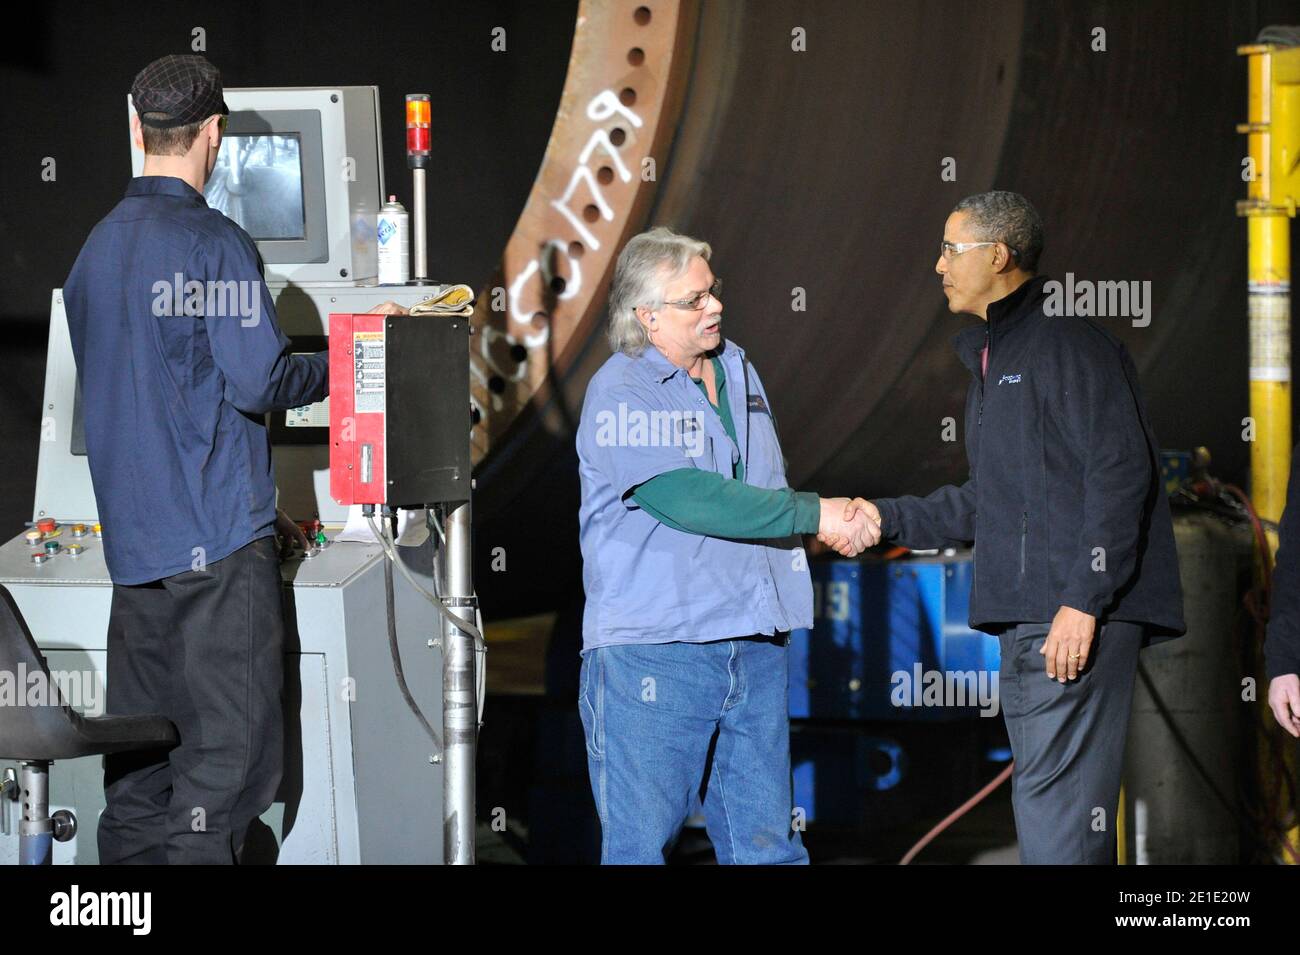 U. S. President Barack Obama (R) greets workers as he tours Tower Tech Systems, Inc., a manufacturer of utility-scale wind towers and monopiles for on- and off-shore wind development, in Manitowoc, Wisconsin on January 26, 2011. President Obama, Vice President Joe Biden and other members of the President's Cabinet traveled across the country Wednesday to highlight the administration's efforts to rebuild the American economy. Photo by Brian Kersey/UPI/ABACAUSA.COM Stock Photo